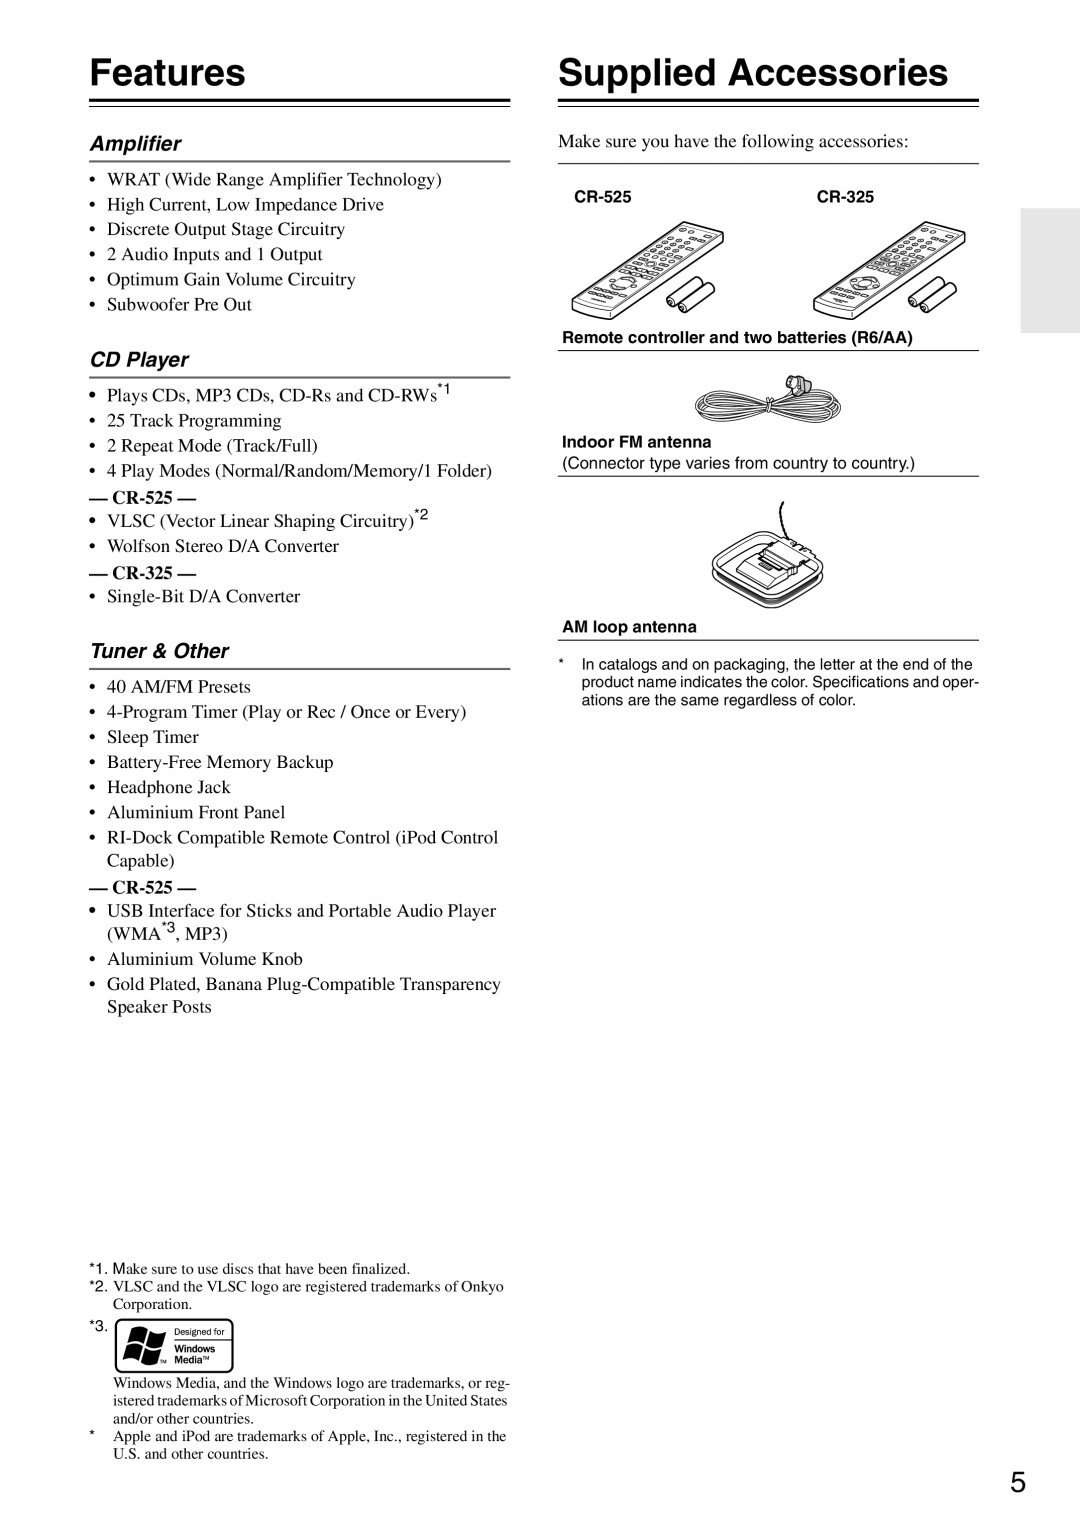 Onkyo CR-525 instruction manual Features, Supplied Accessories, Amplifier, CD Player, Tuner & Other, CR-325 